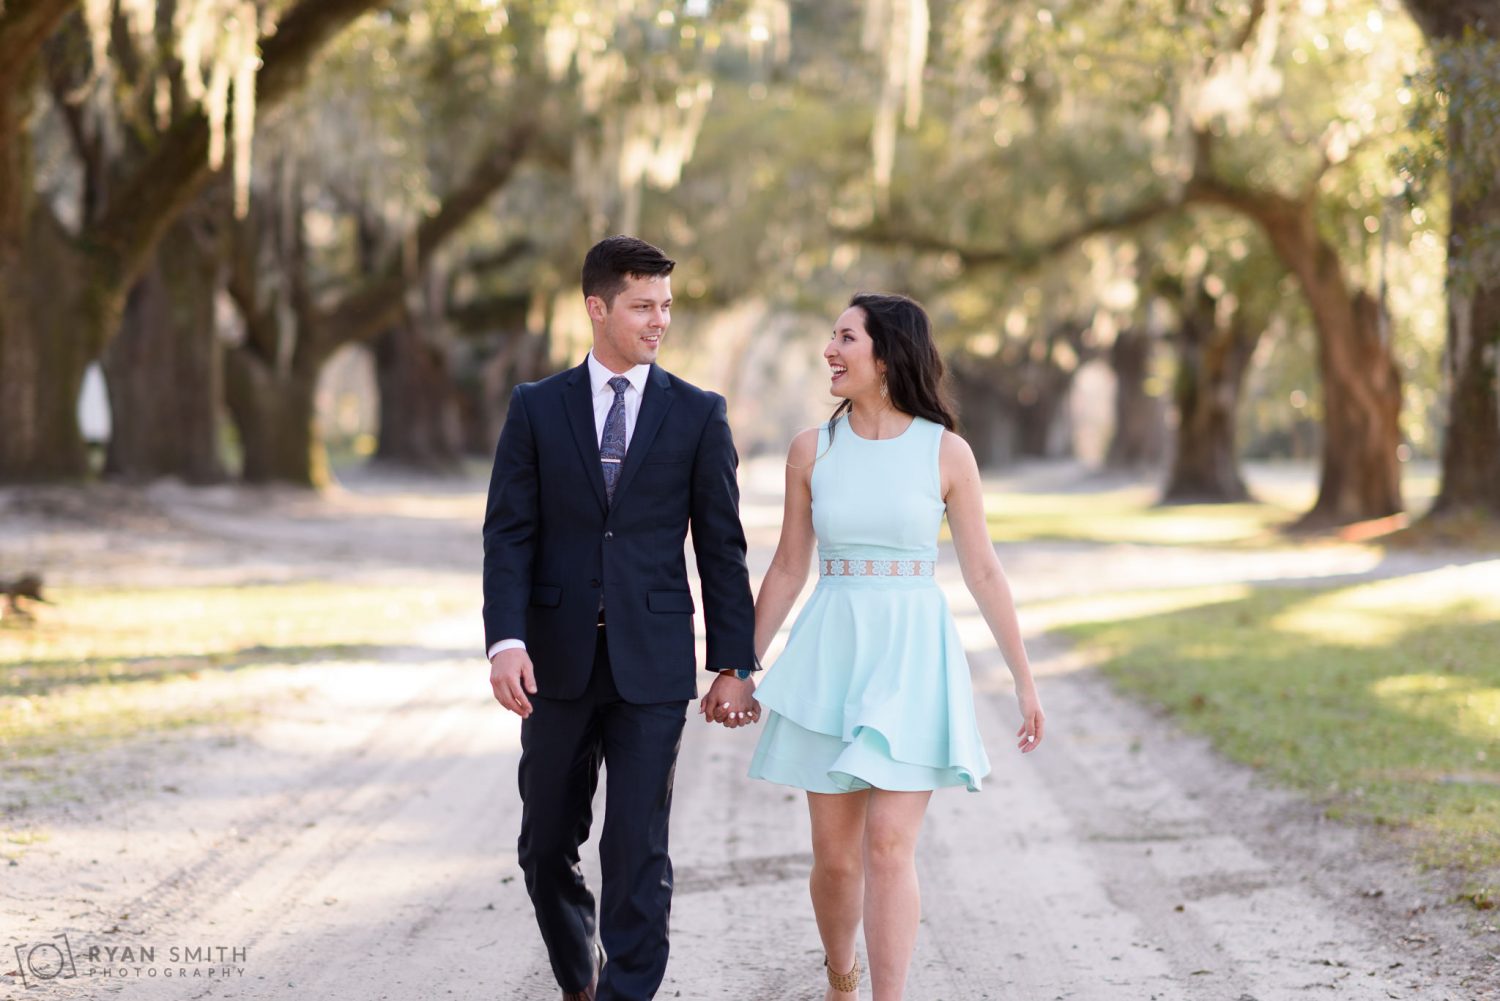 Walking down the roadway holding hands Mansfield Plantation, Georgetown